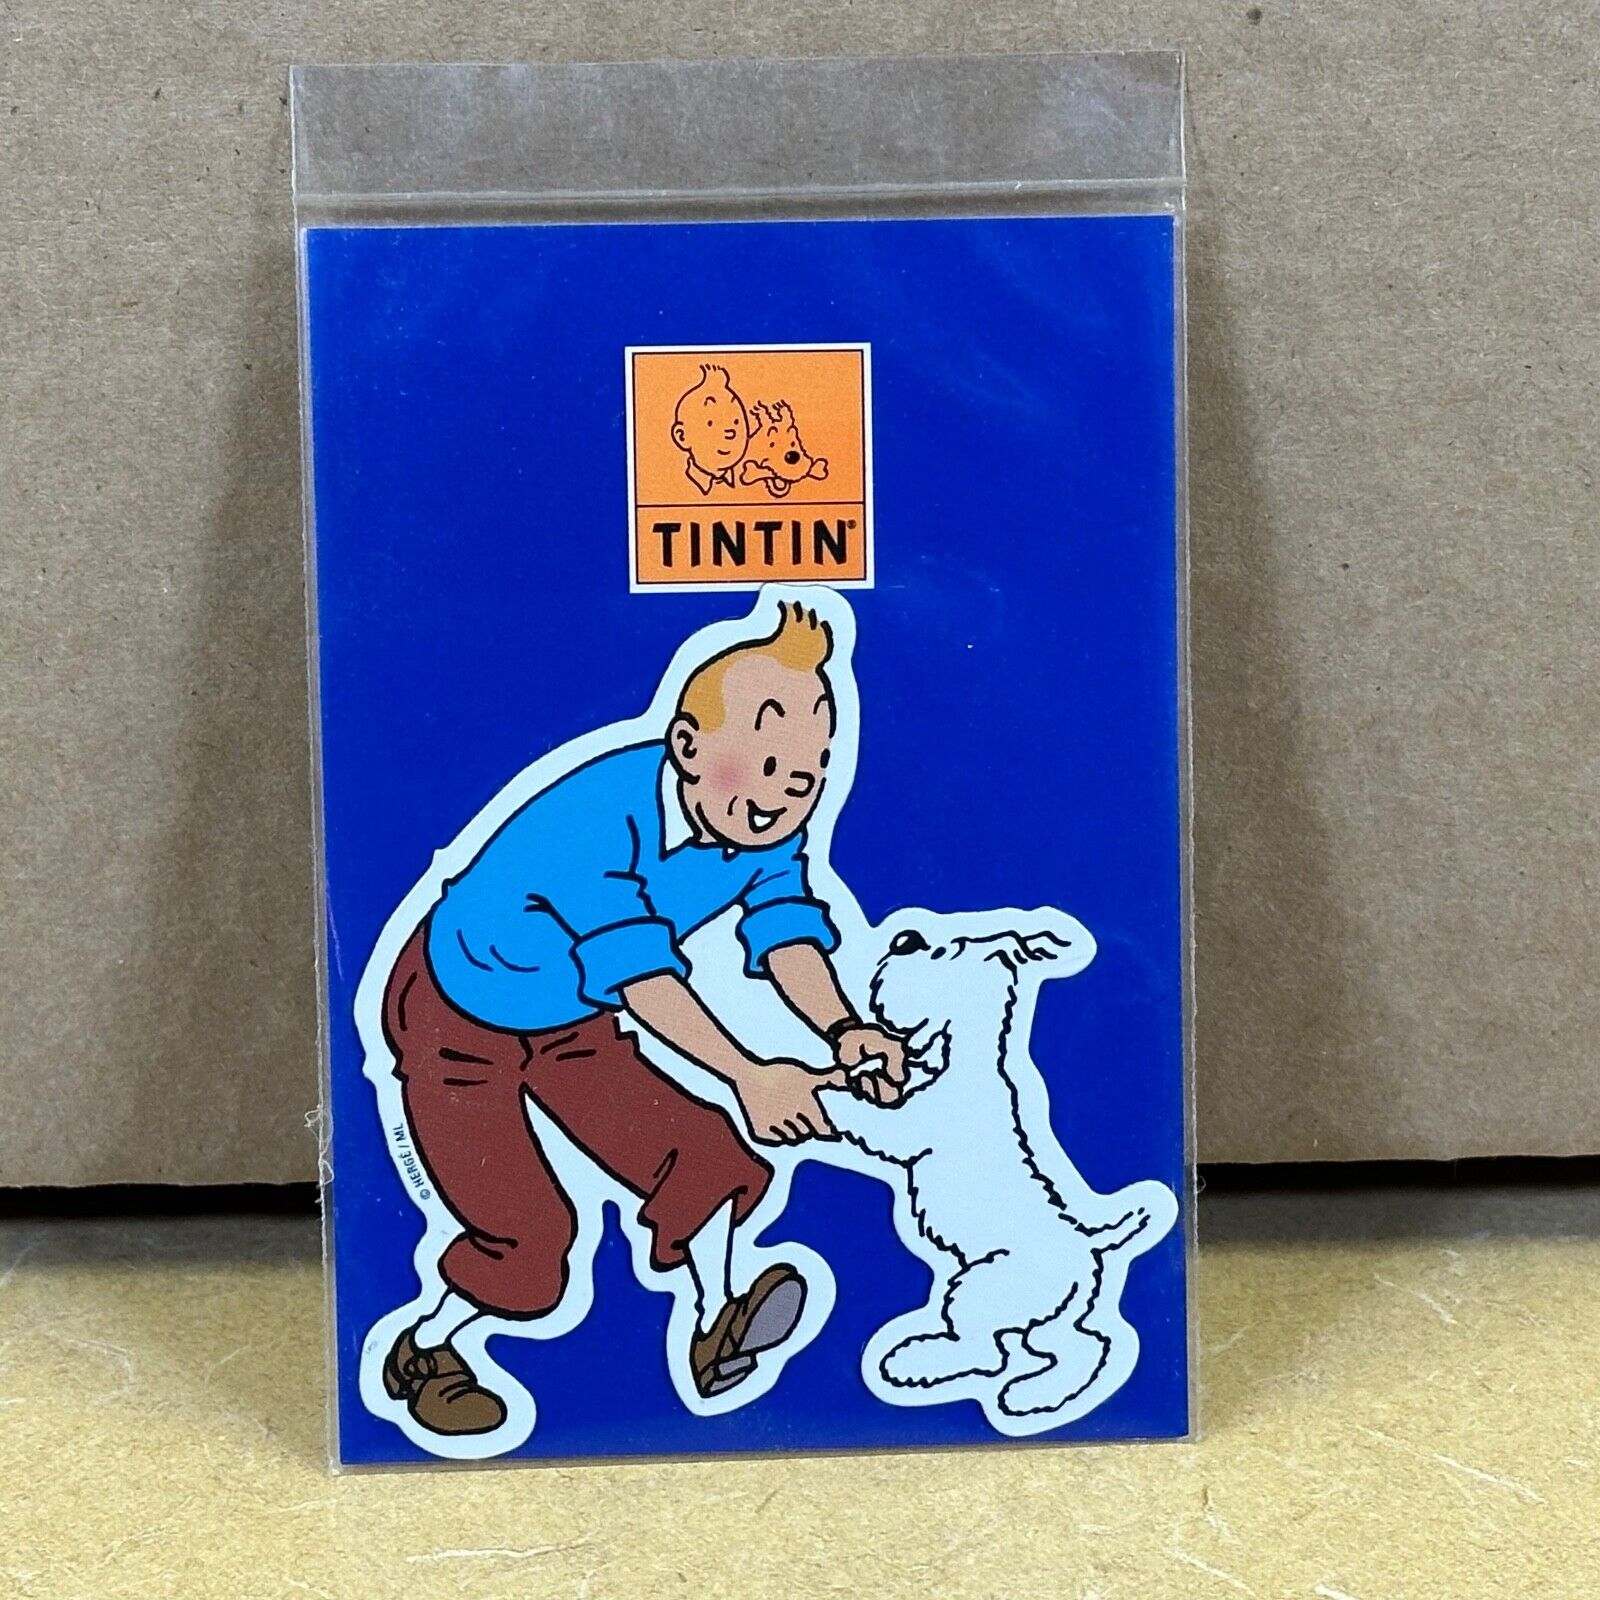 TINTIN _ Sealed pouch _ with sticker inside _ never opened _ from 1980-ies